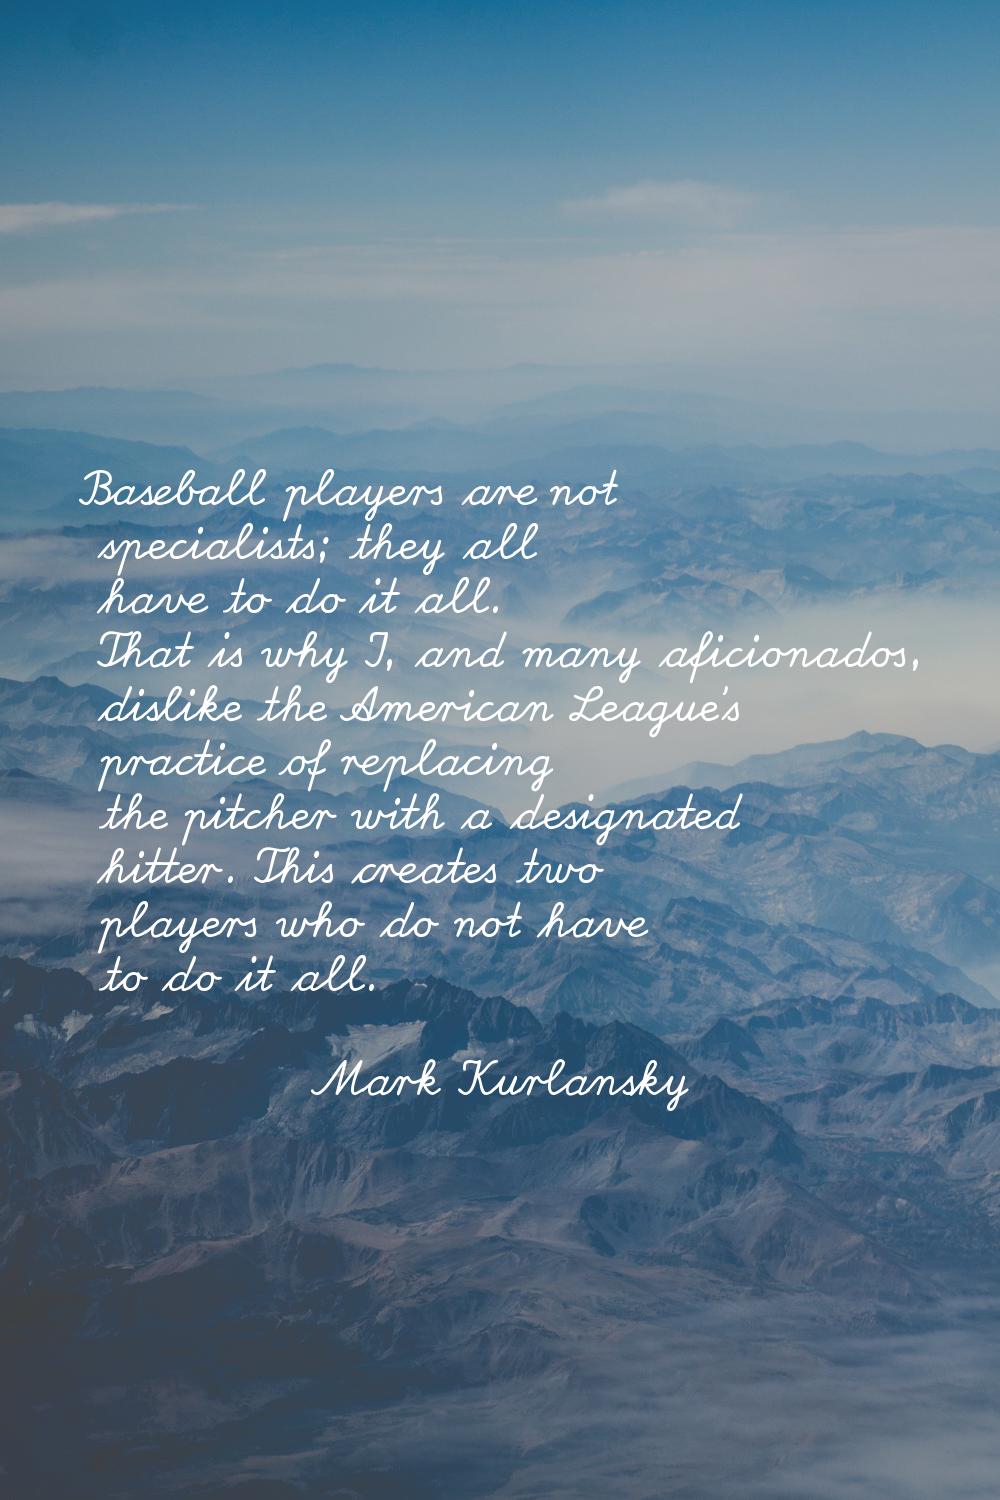 Baseball players are not specialists; they all have to do it all. That is why I, and many aficionad